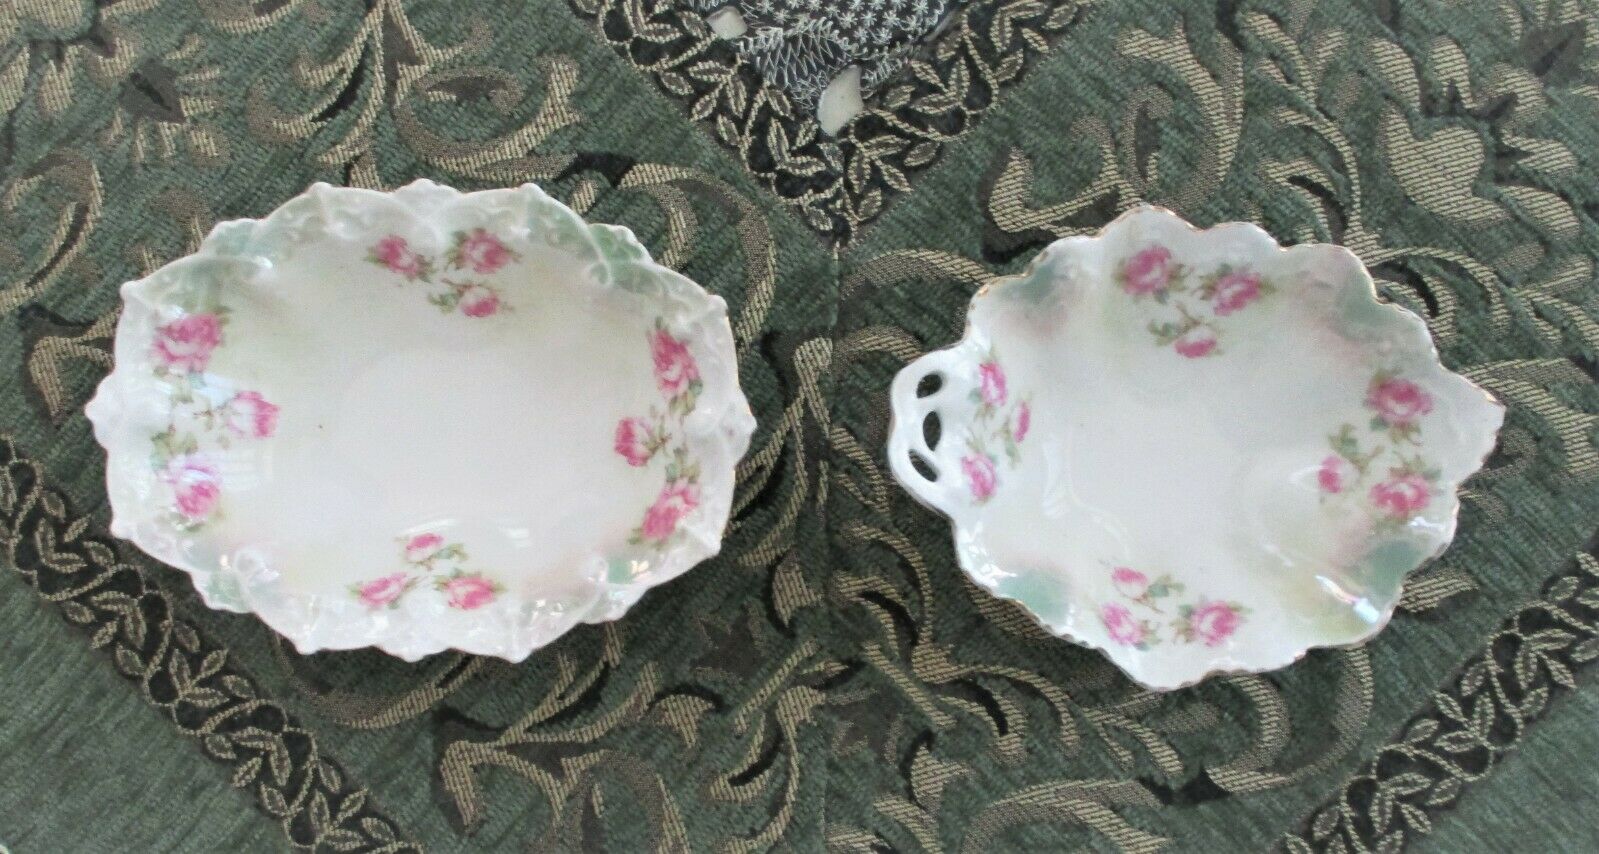 Antique Mz Austria Hand Painted Scalloped Floral Rose Porcelain Candy Dishes (2)